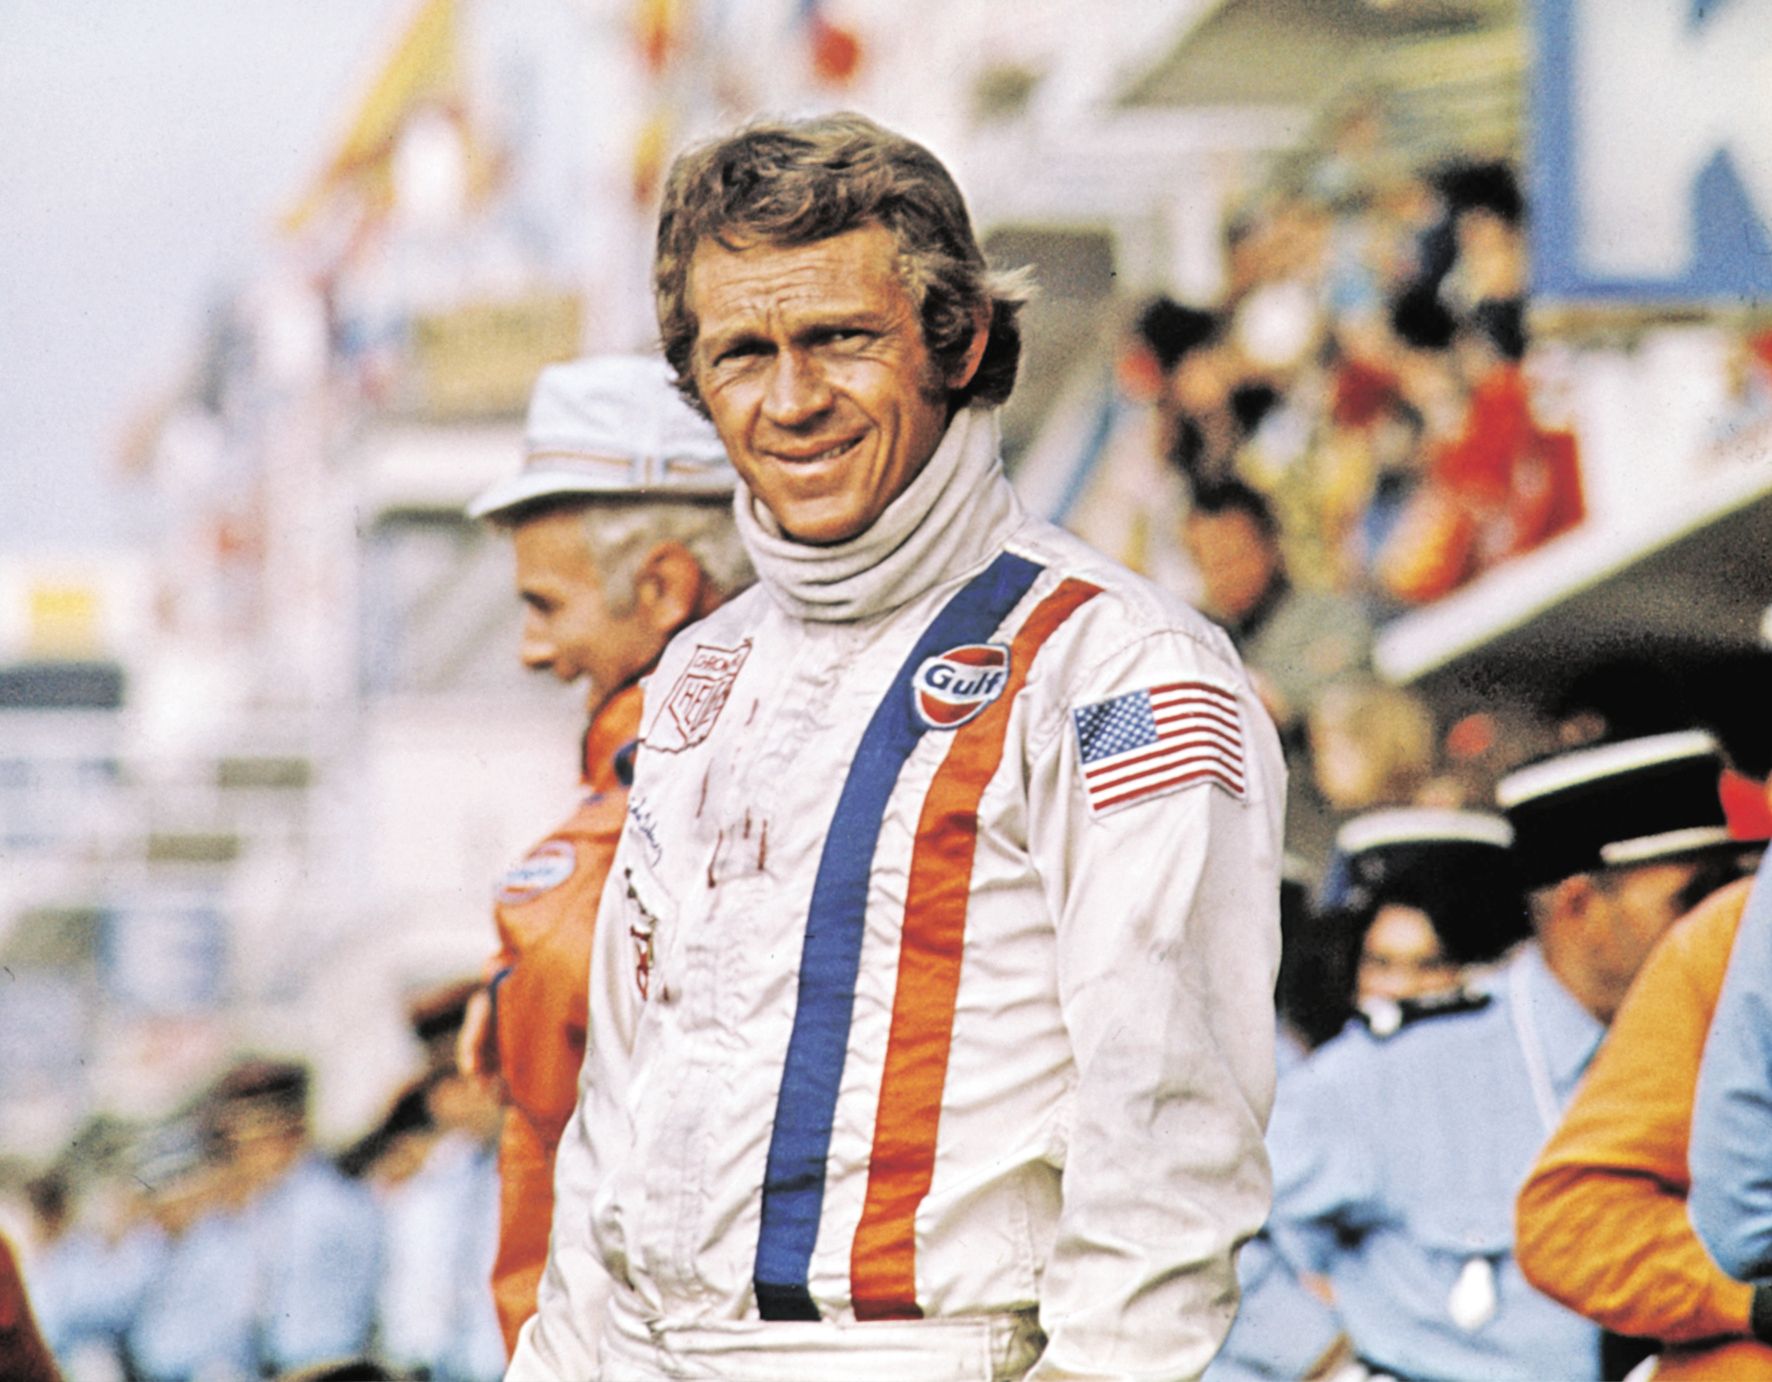 Le mans with steve mcqueen